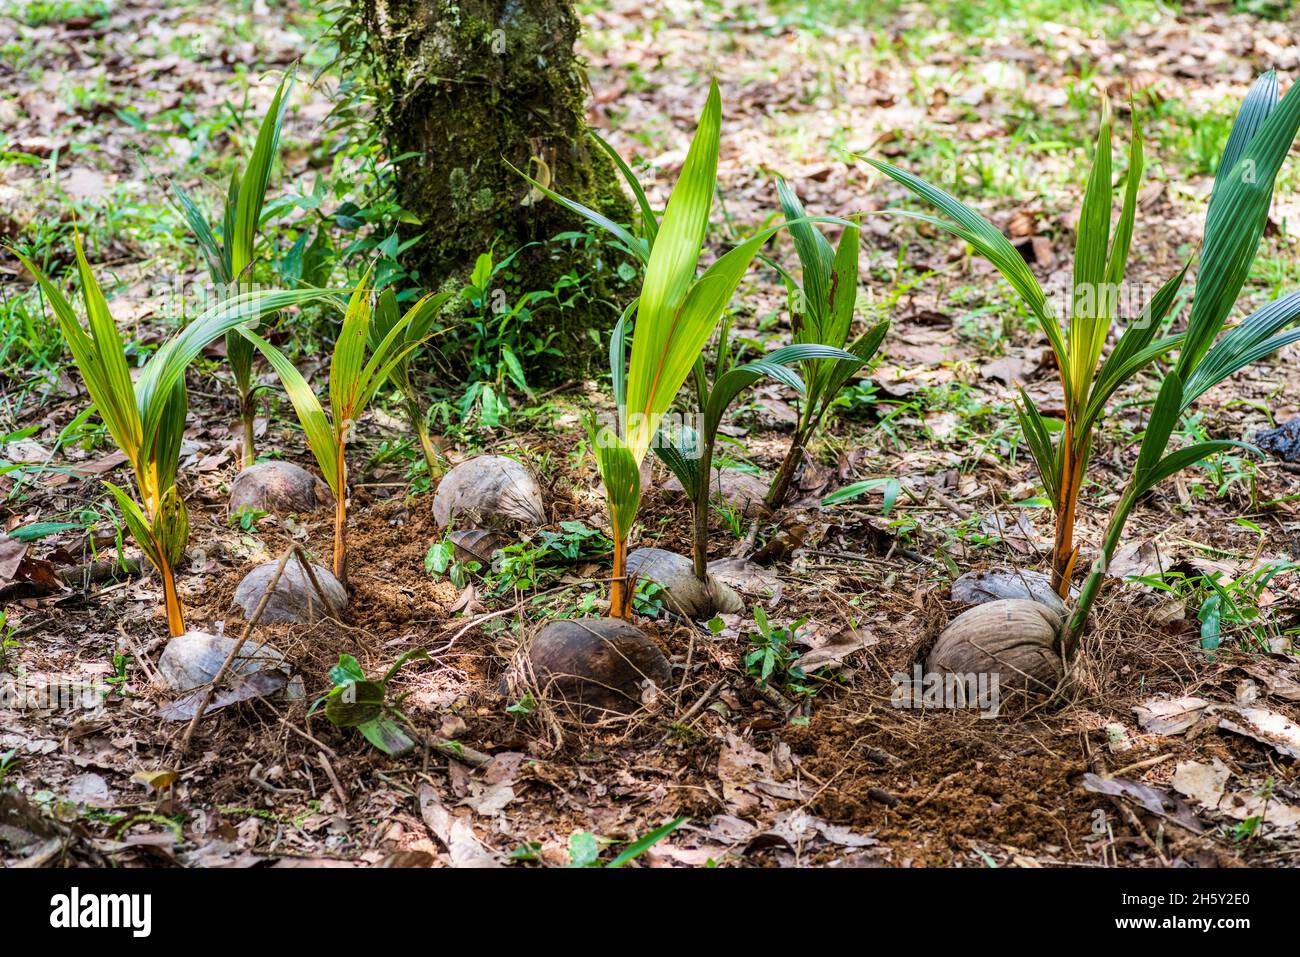 reforestation in the Amazon forest,coconut palm and native trees. Stock Photo